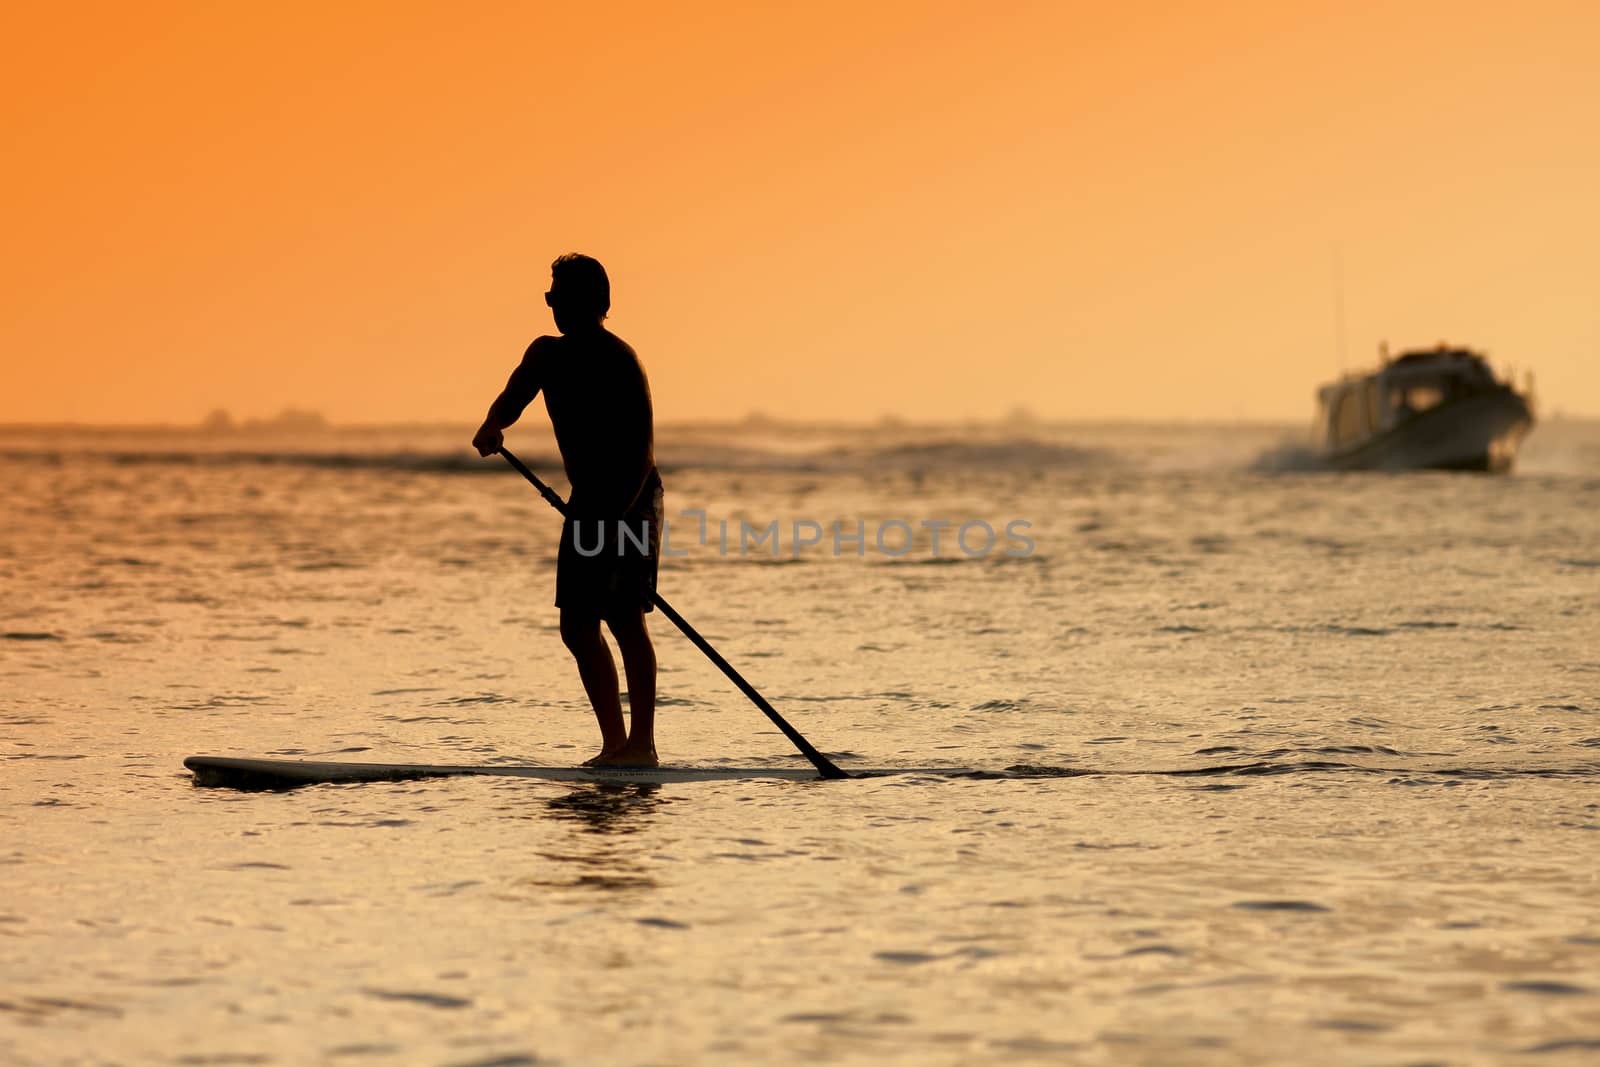 Surfer  with a surfboard at Sunset Tme, Bali, Indonesia
released